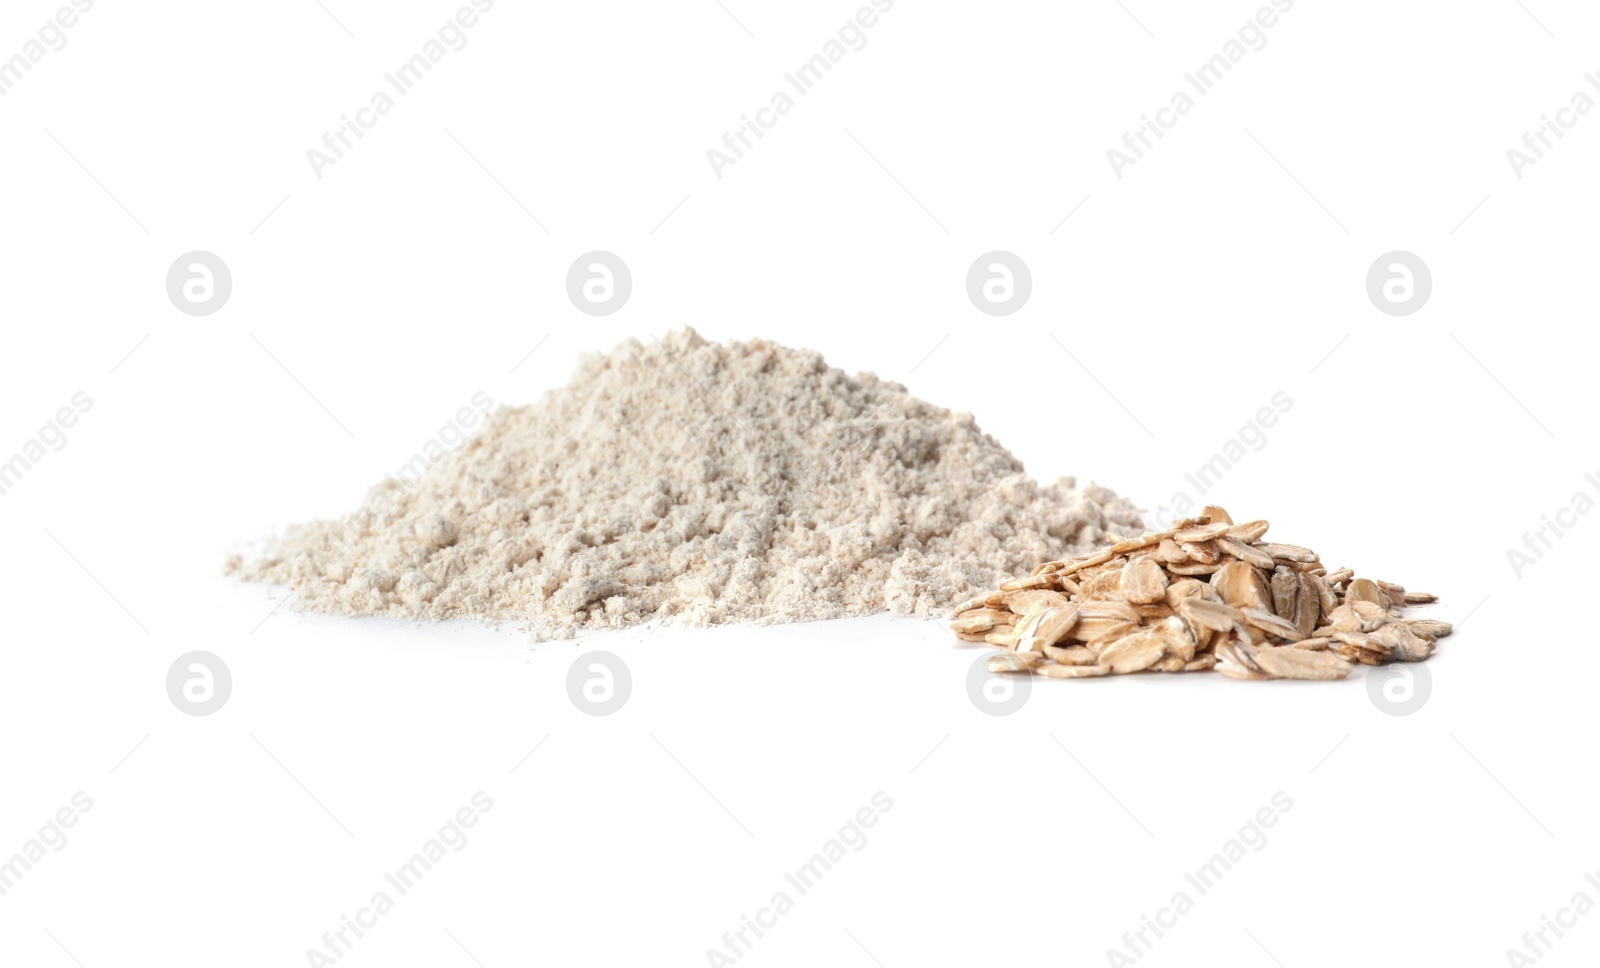 Photo of Piles of oatmeal and flour isolated on white